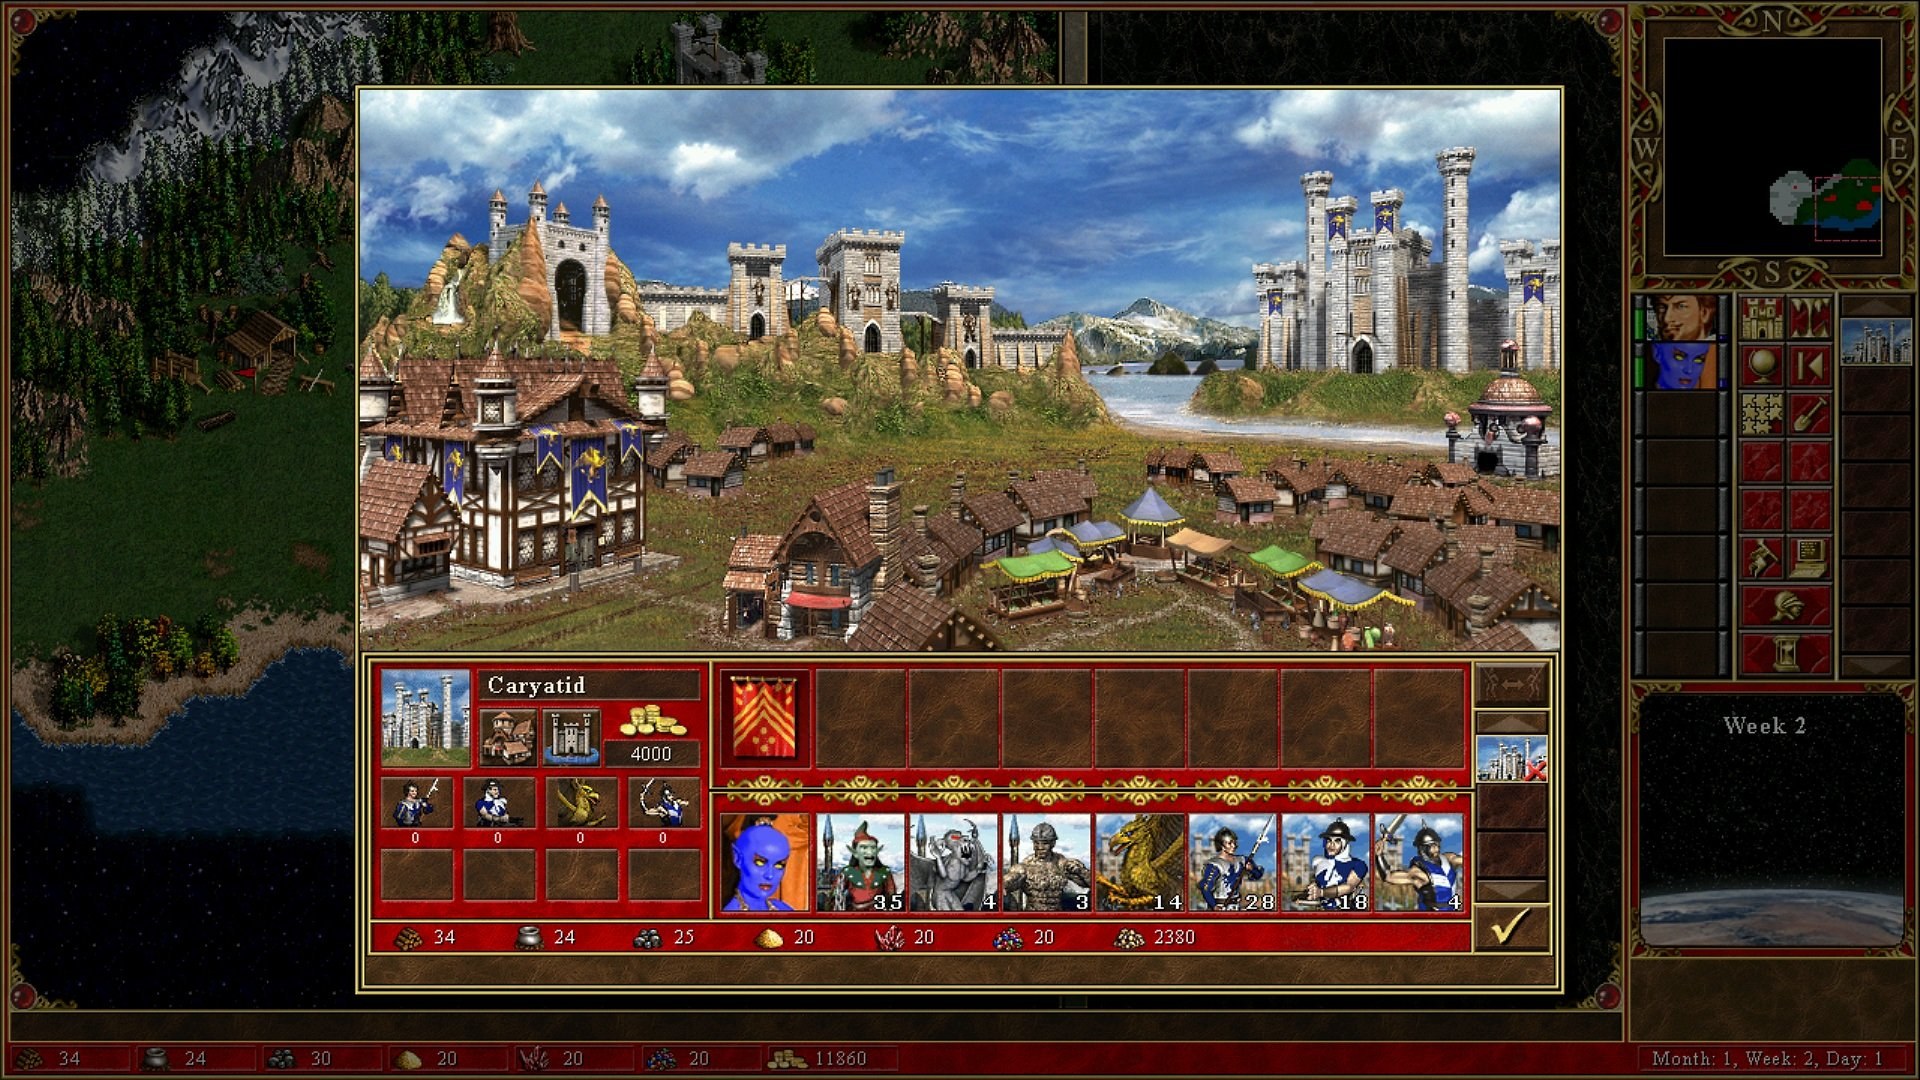 Heroes of might and magic 3 карты. Герои меча и магии 3. Герои меча и магии 3 геймплей. Герои 3 Бастион. Герои меча и магии 3 Скриншоты.